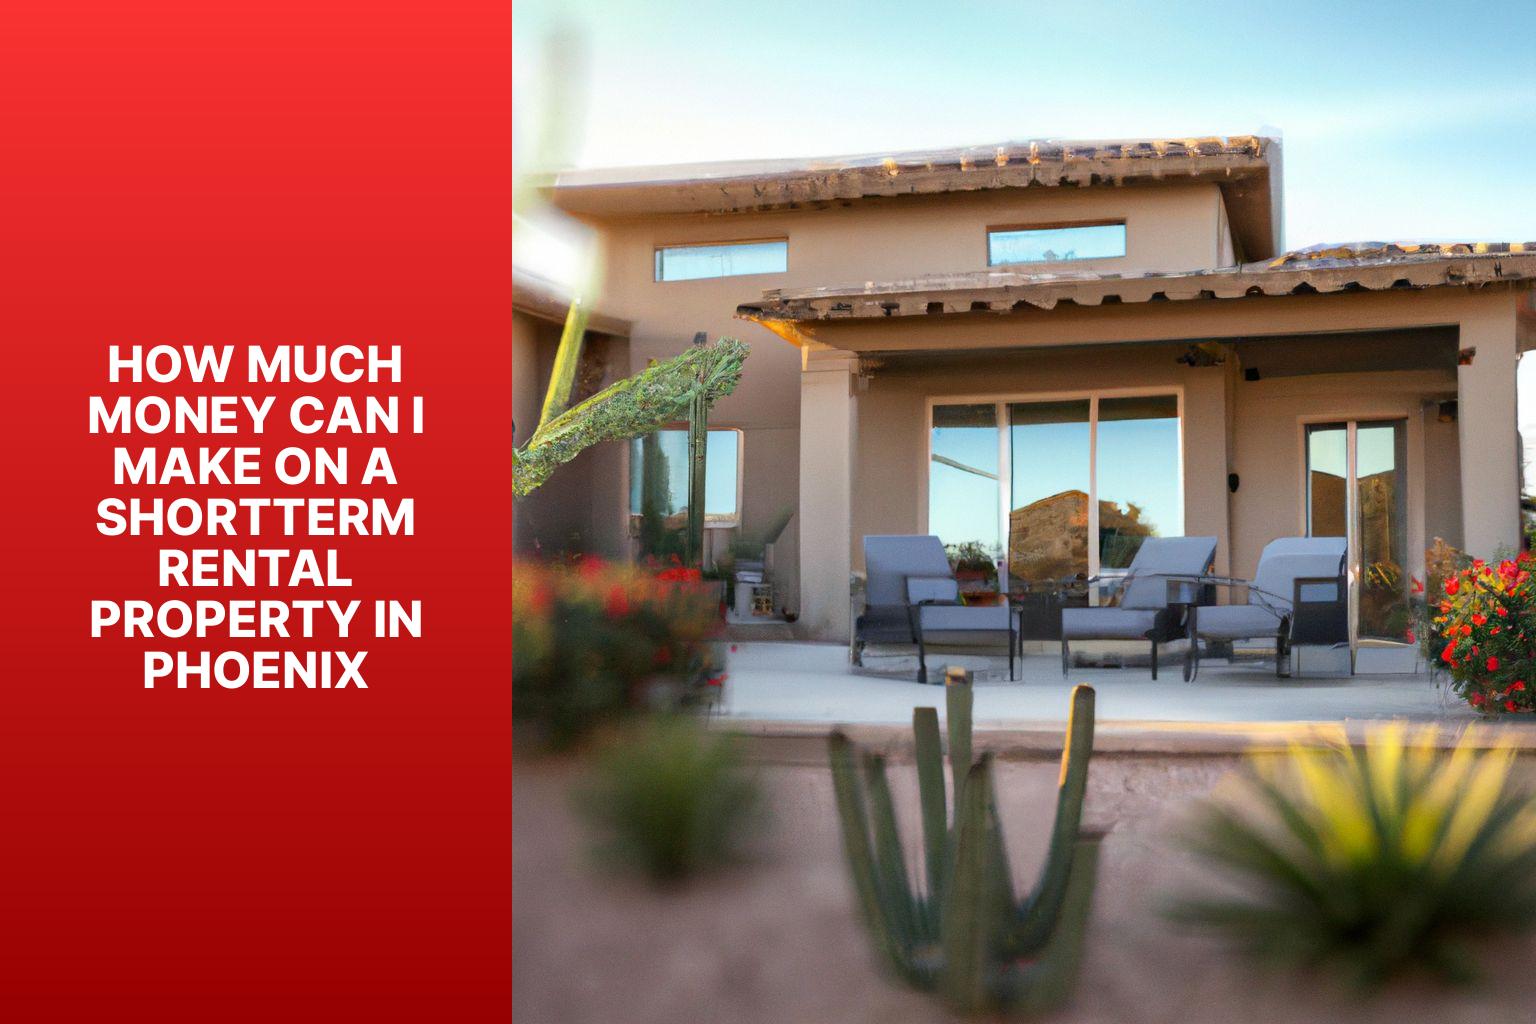 How much money can I make on a shortterm rental property in Phoenix